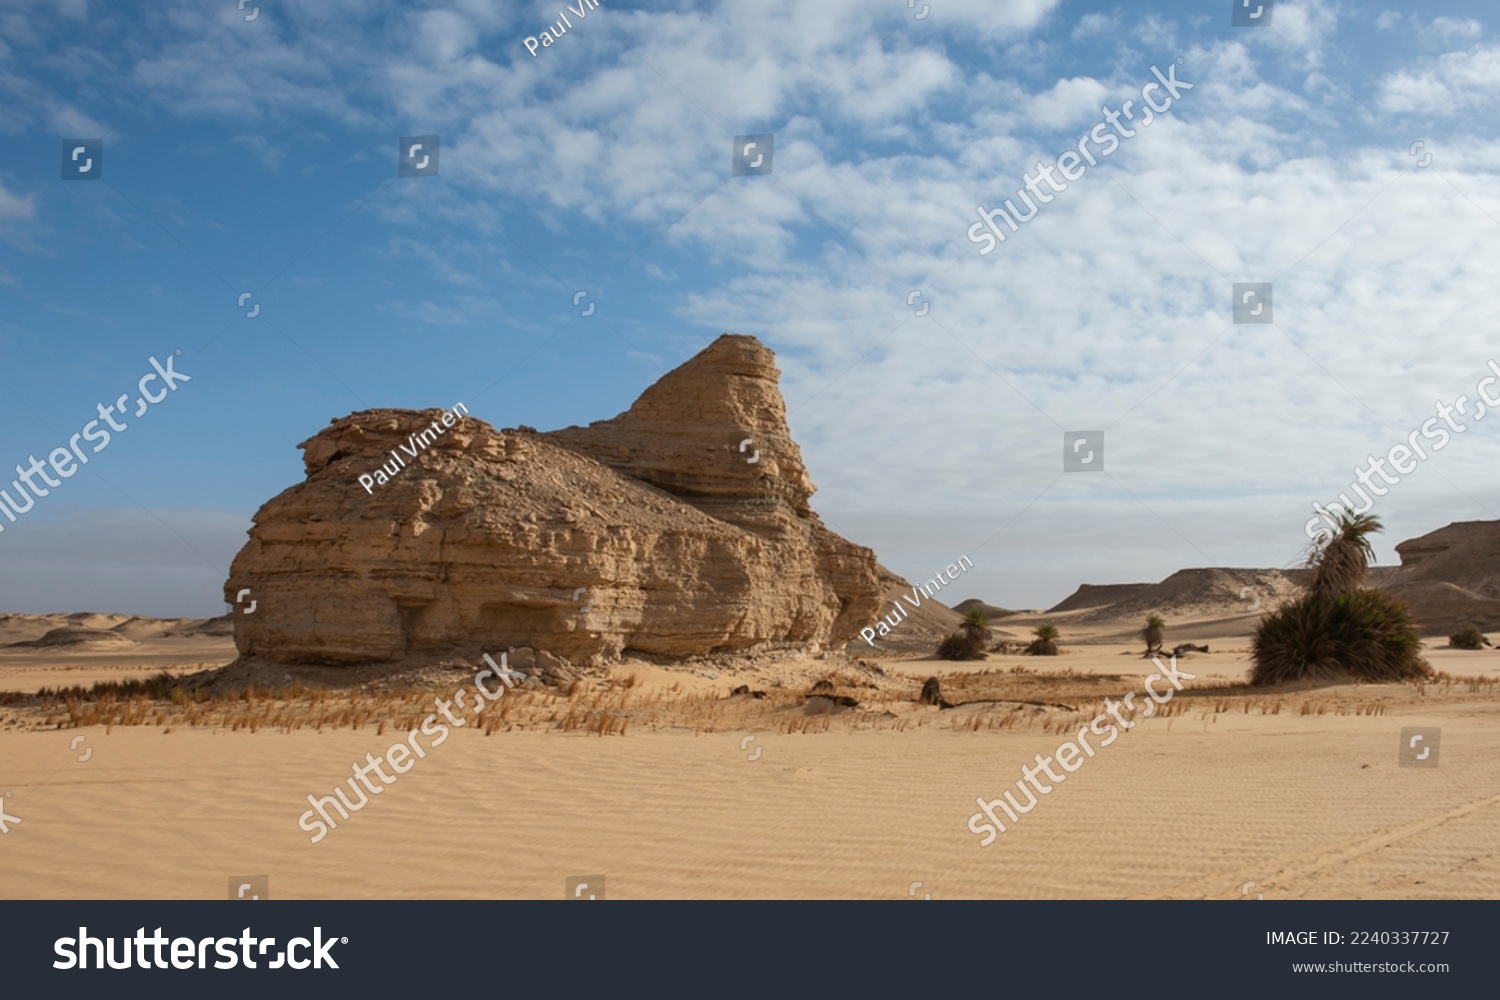 Landscape scenic view of desolate barren western desert in Egypt farafra oasis with rock formation on sand dunes and bushes #2240337727